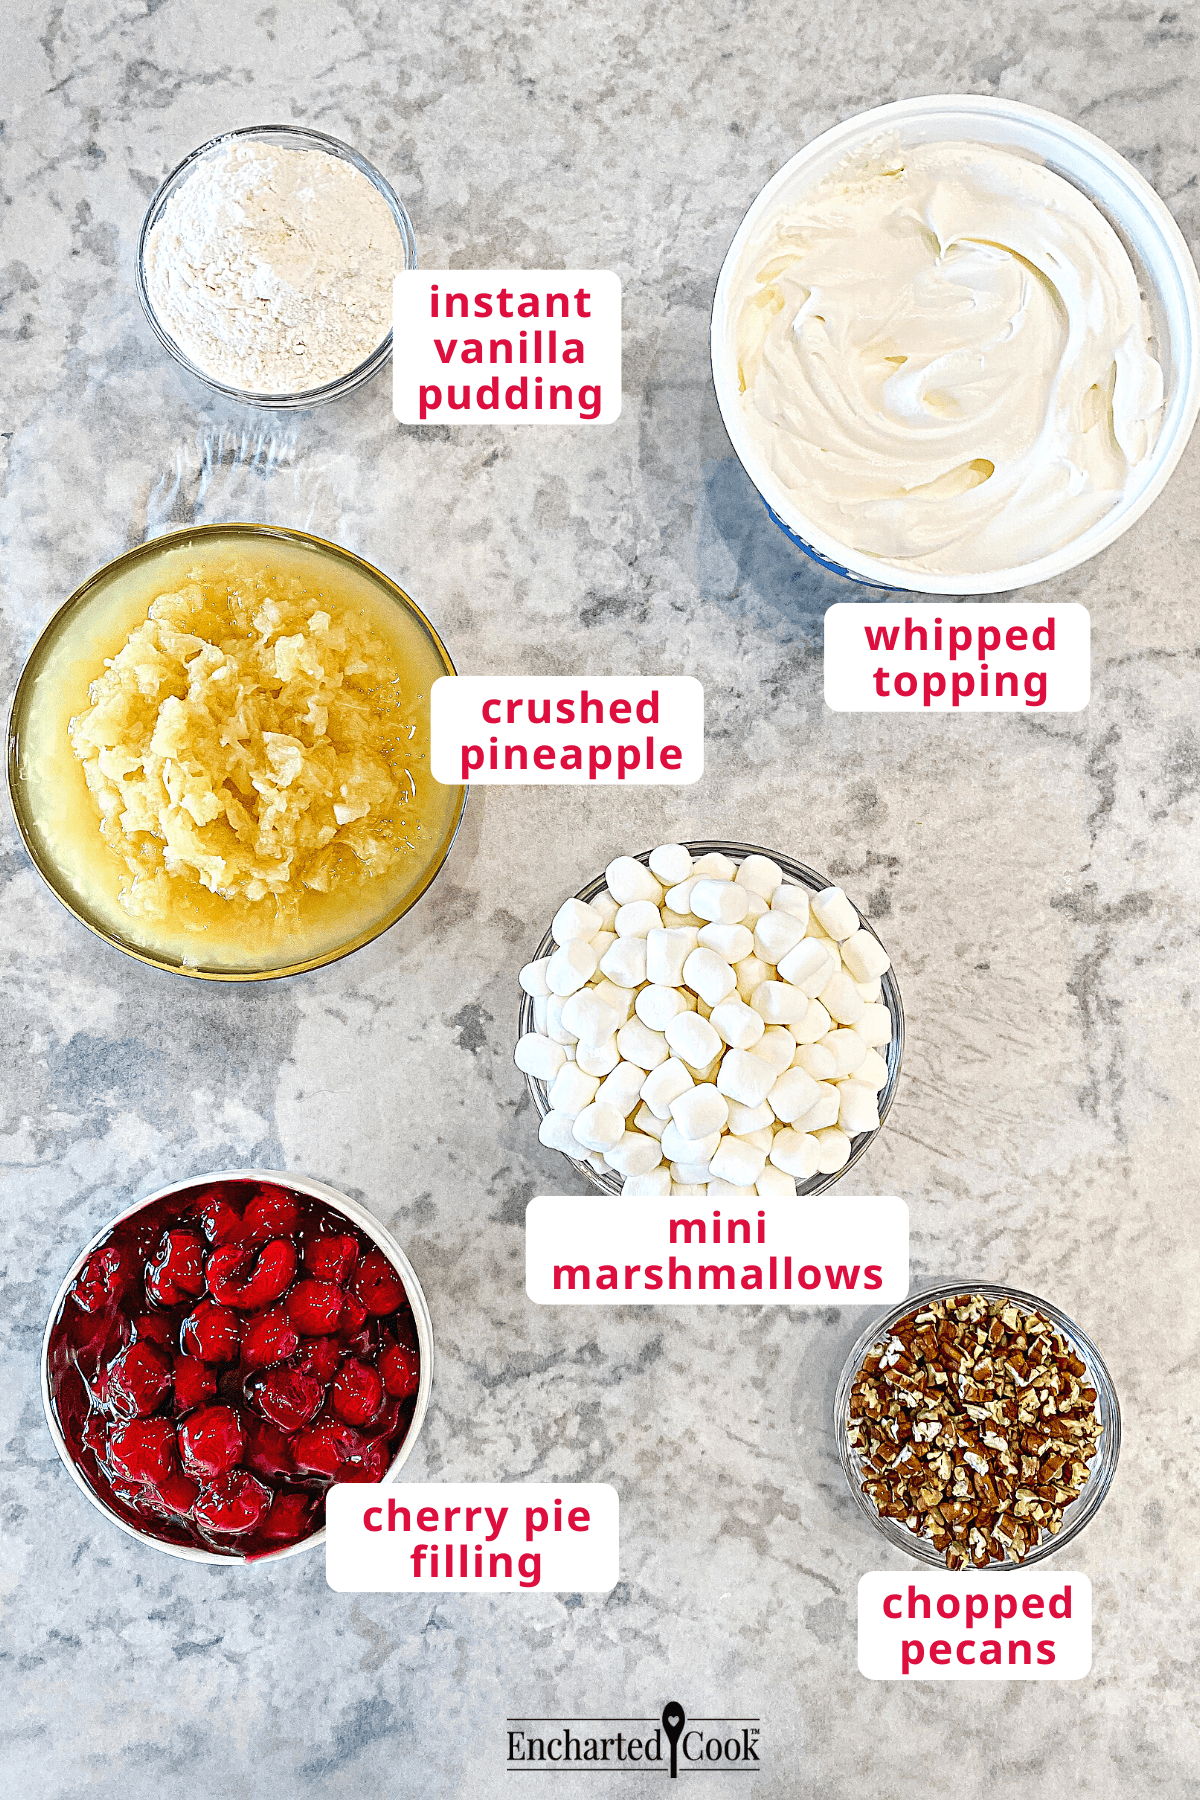 The ingredients, clockwise from top right: whipped topping, mini marshmallows, chopped pecans, cherry pie filling, crushed pineapple, and instant vanilla pudding.